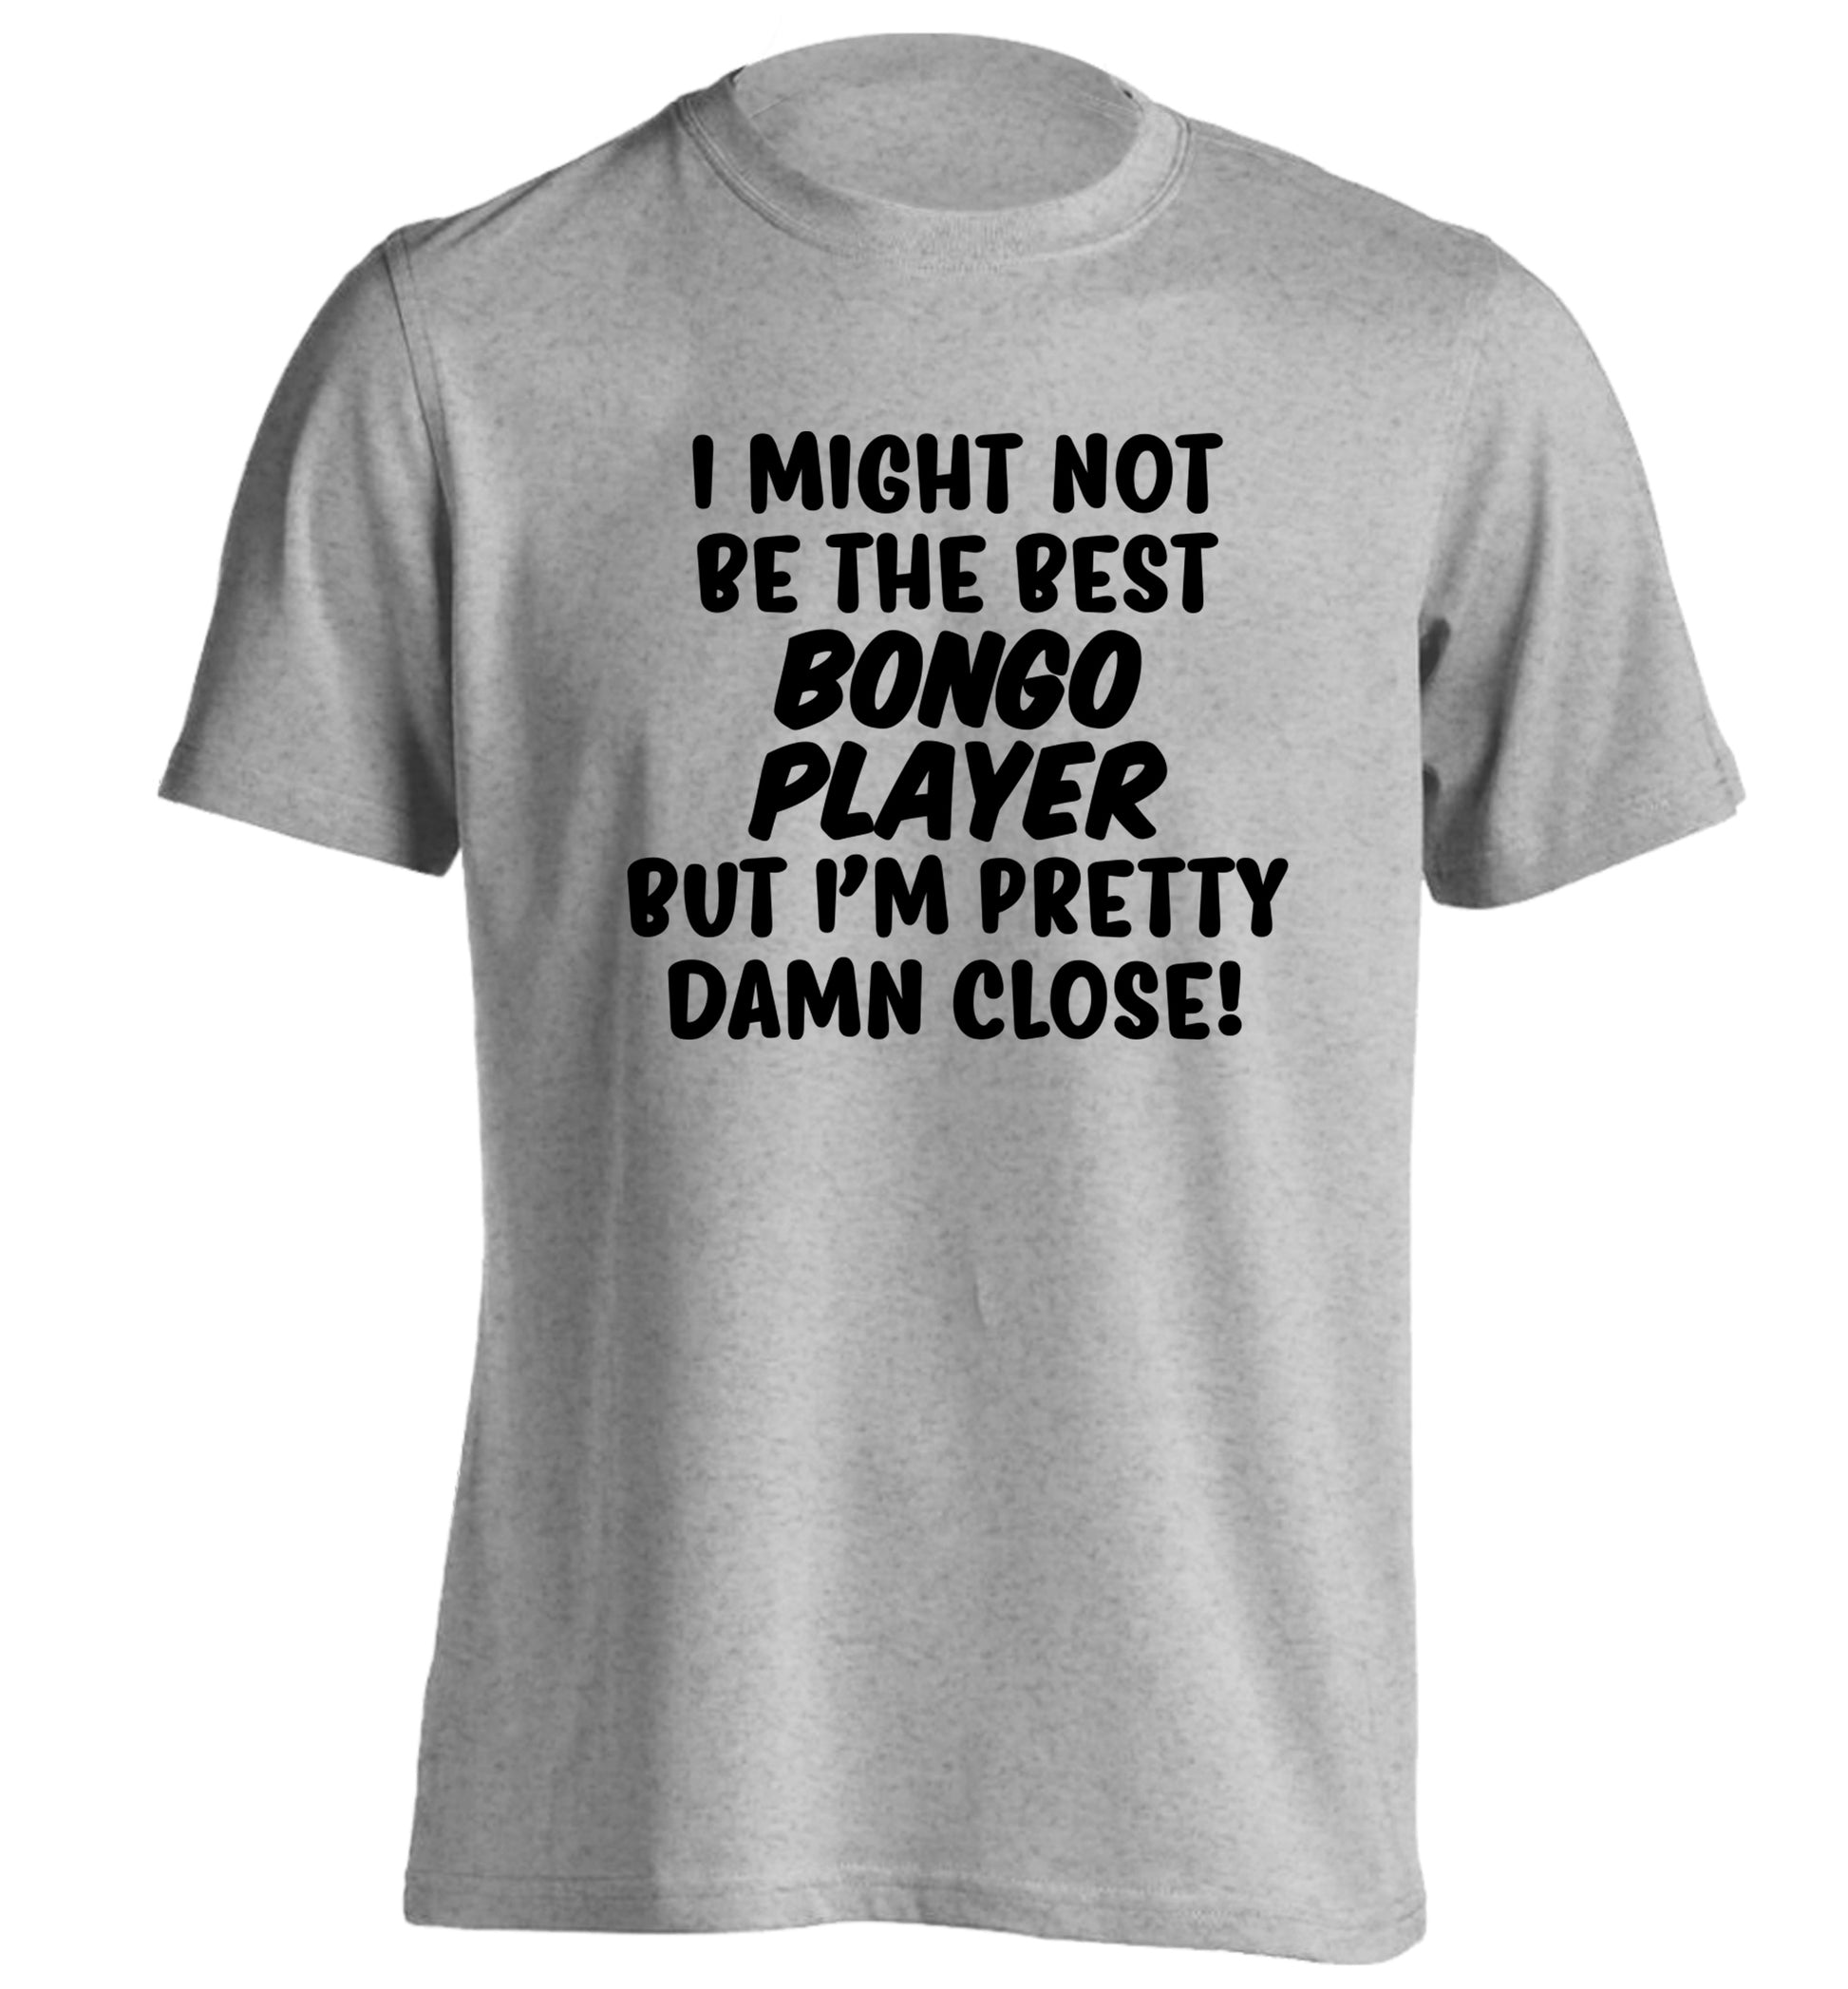 I might not be the best bongo player but I'm pretty close! adults unisexgrey Tshirt 2XL